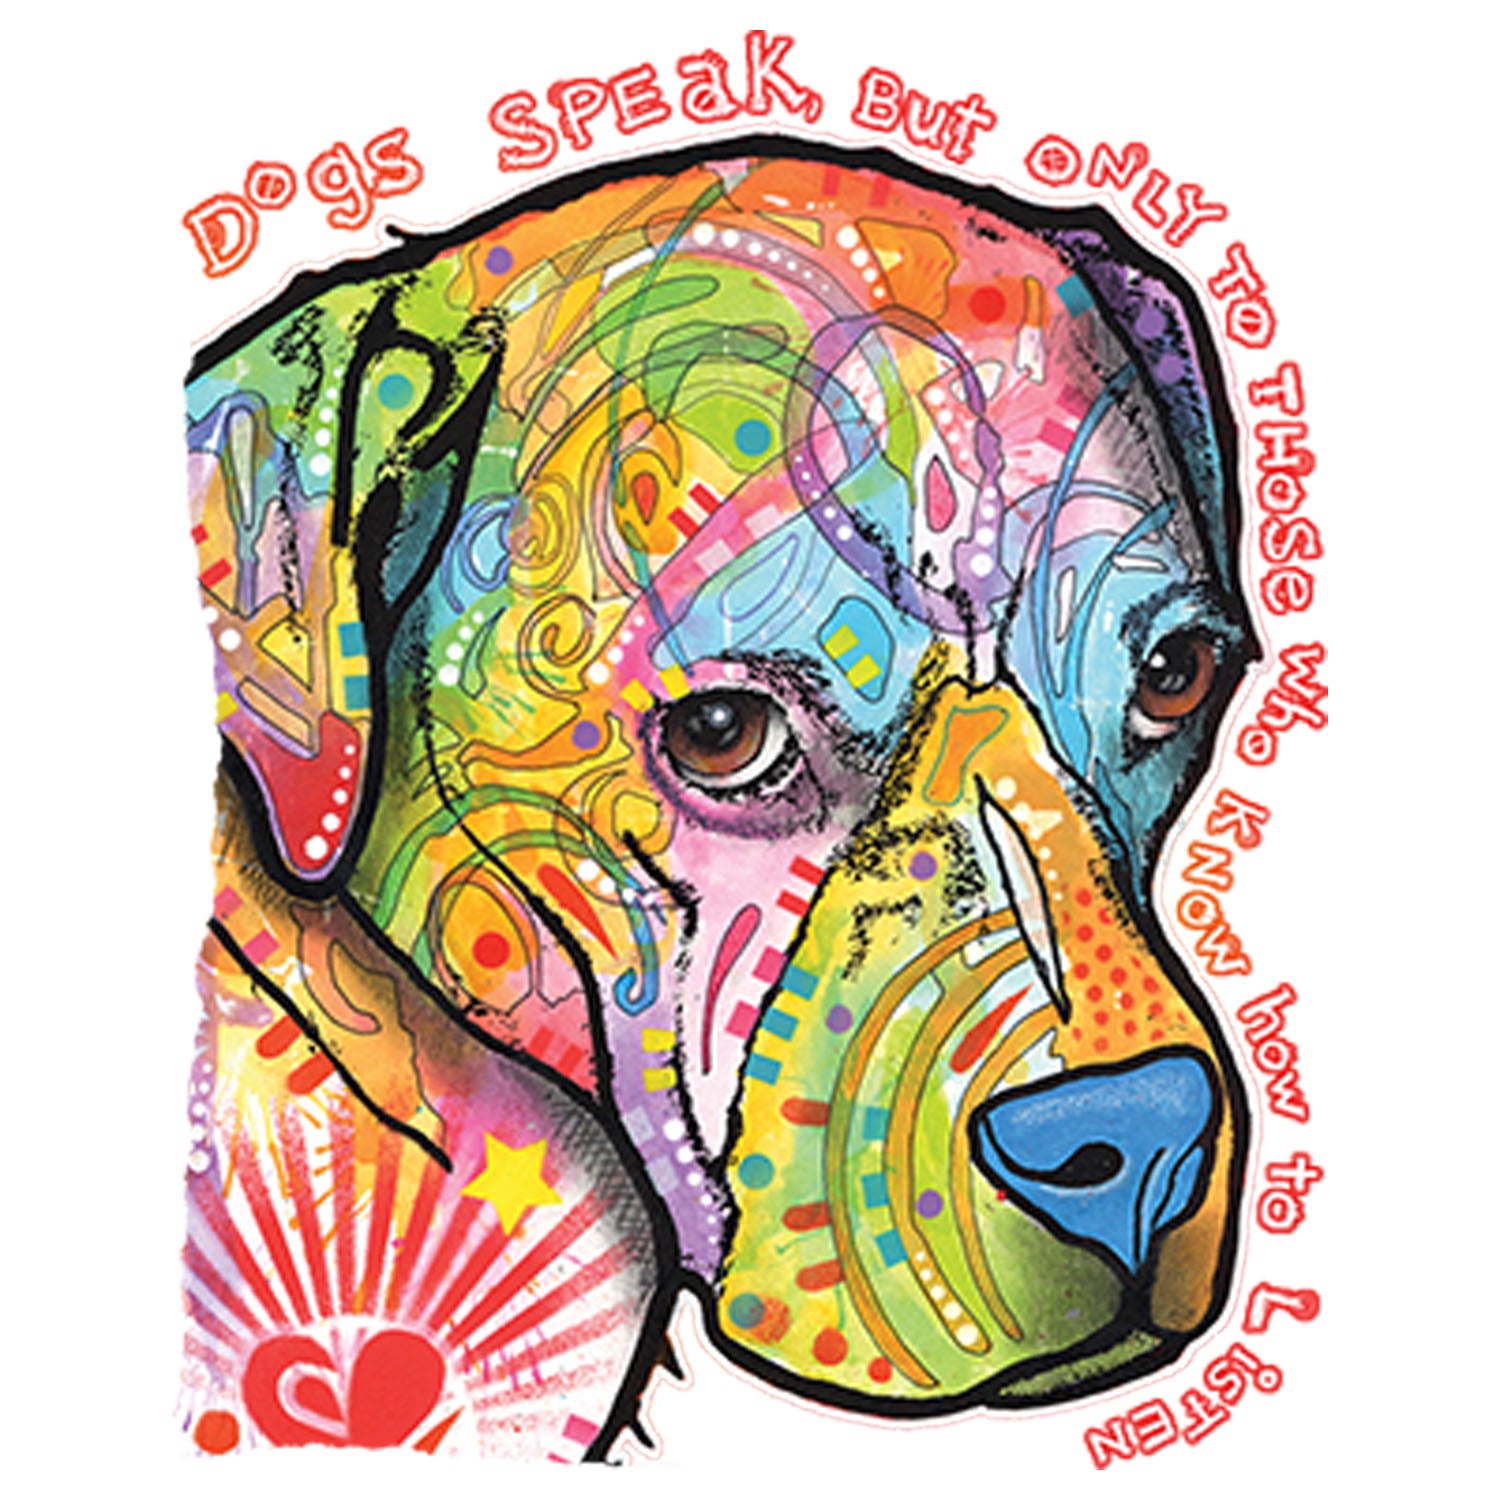 Dog Speak but Only to Those Who Know How Listen Printed T-Shirt-Black